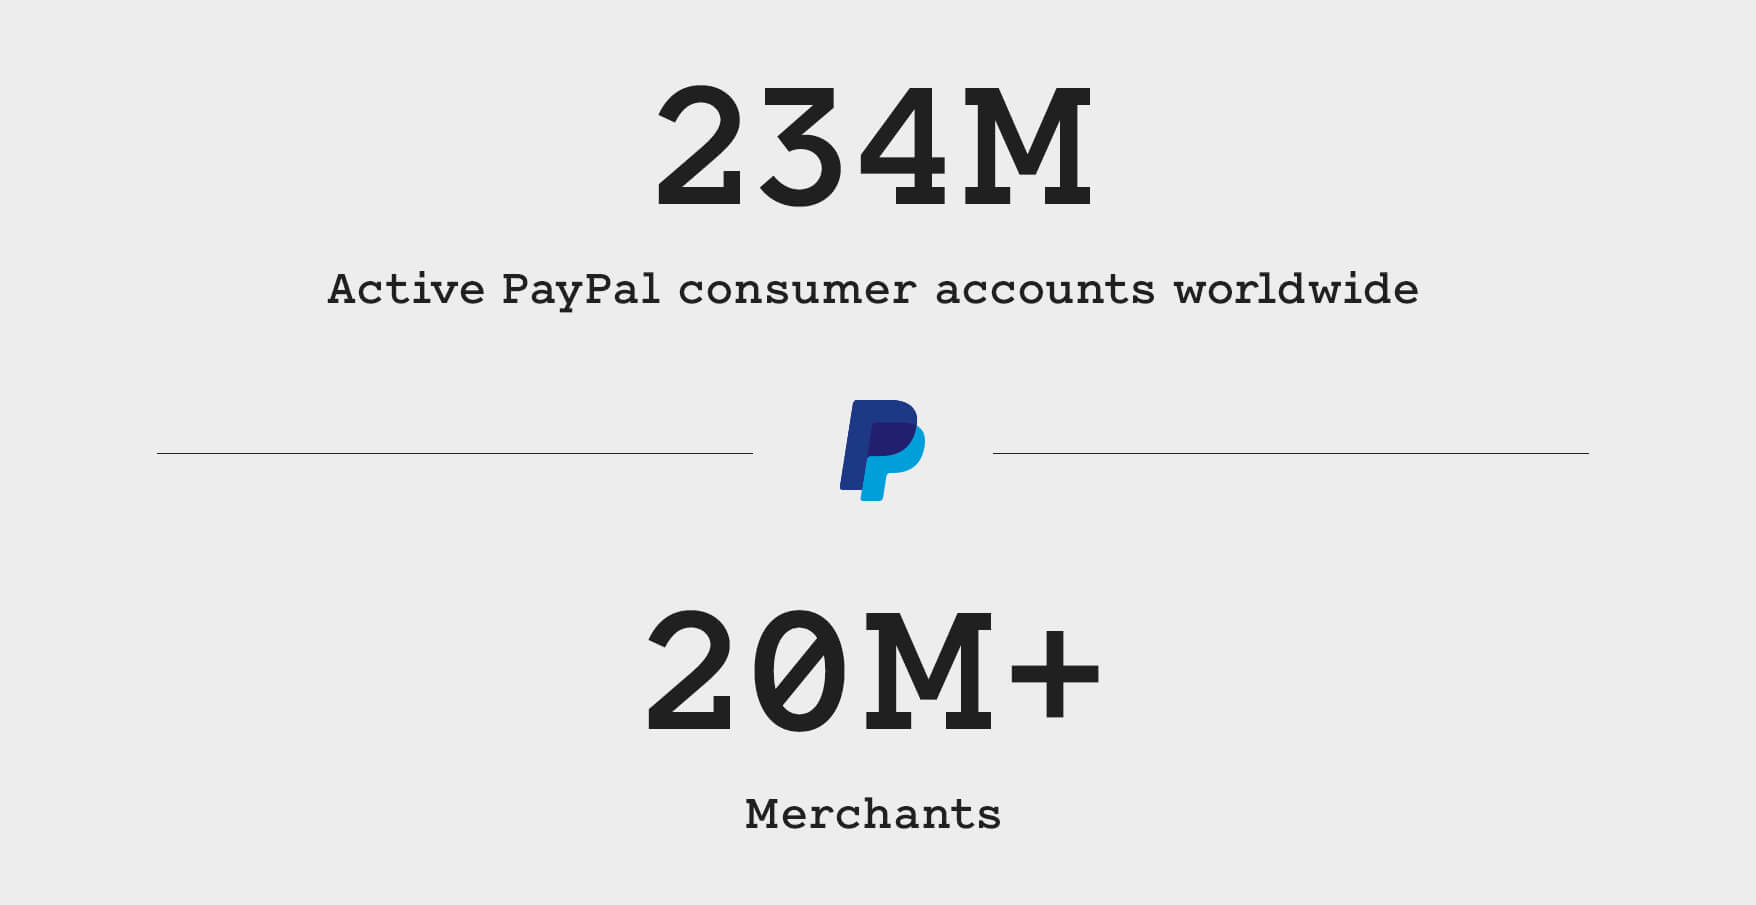 BT Growth Post Brighter Future PayPal